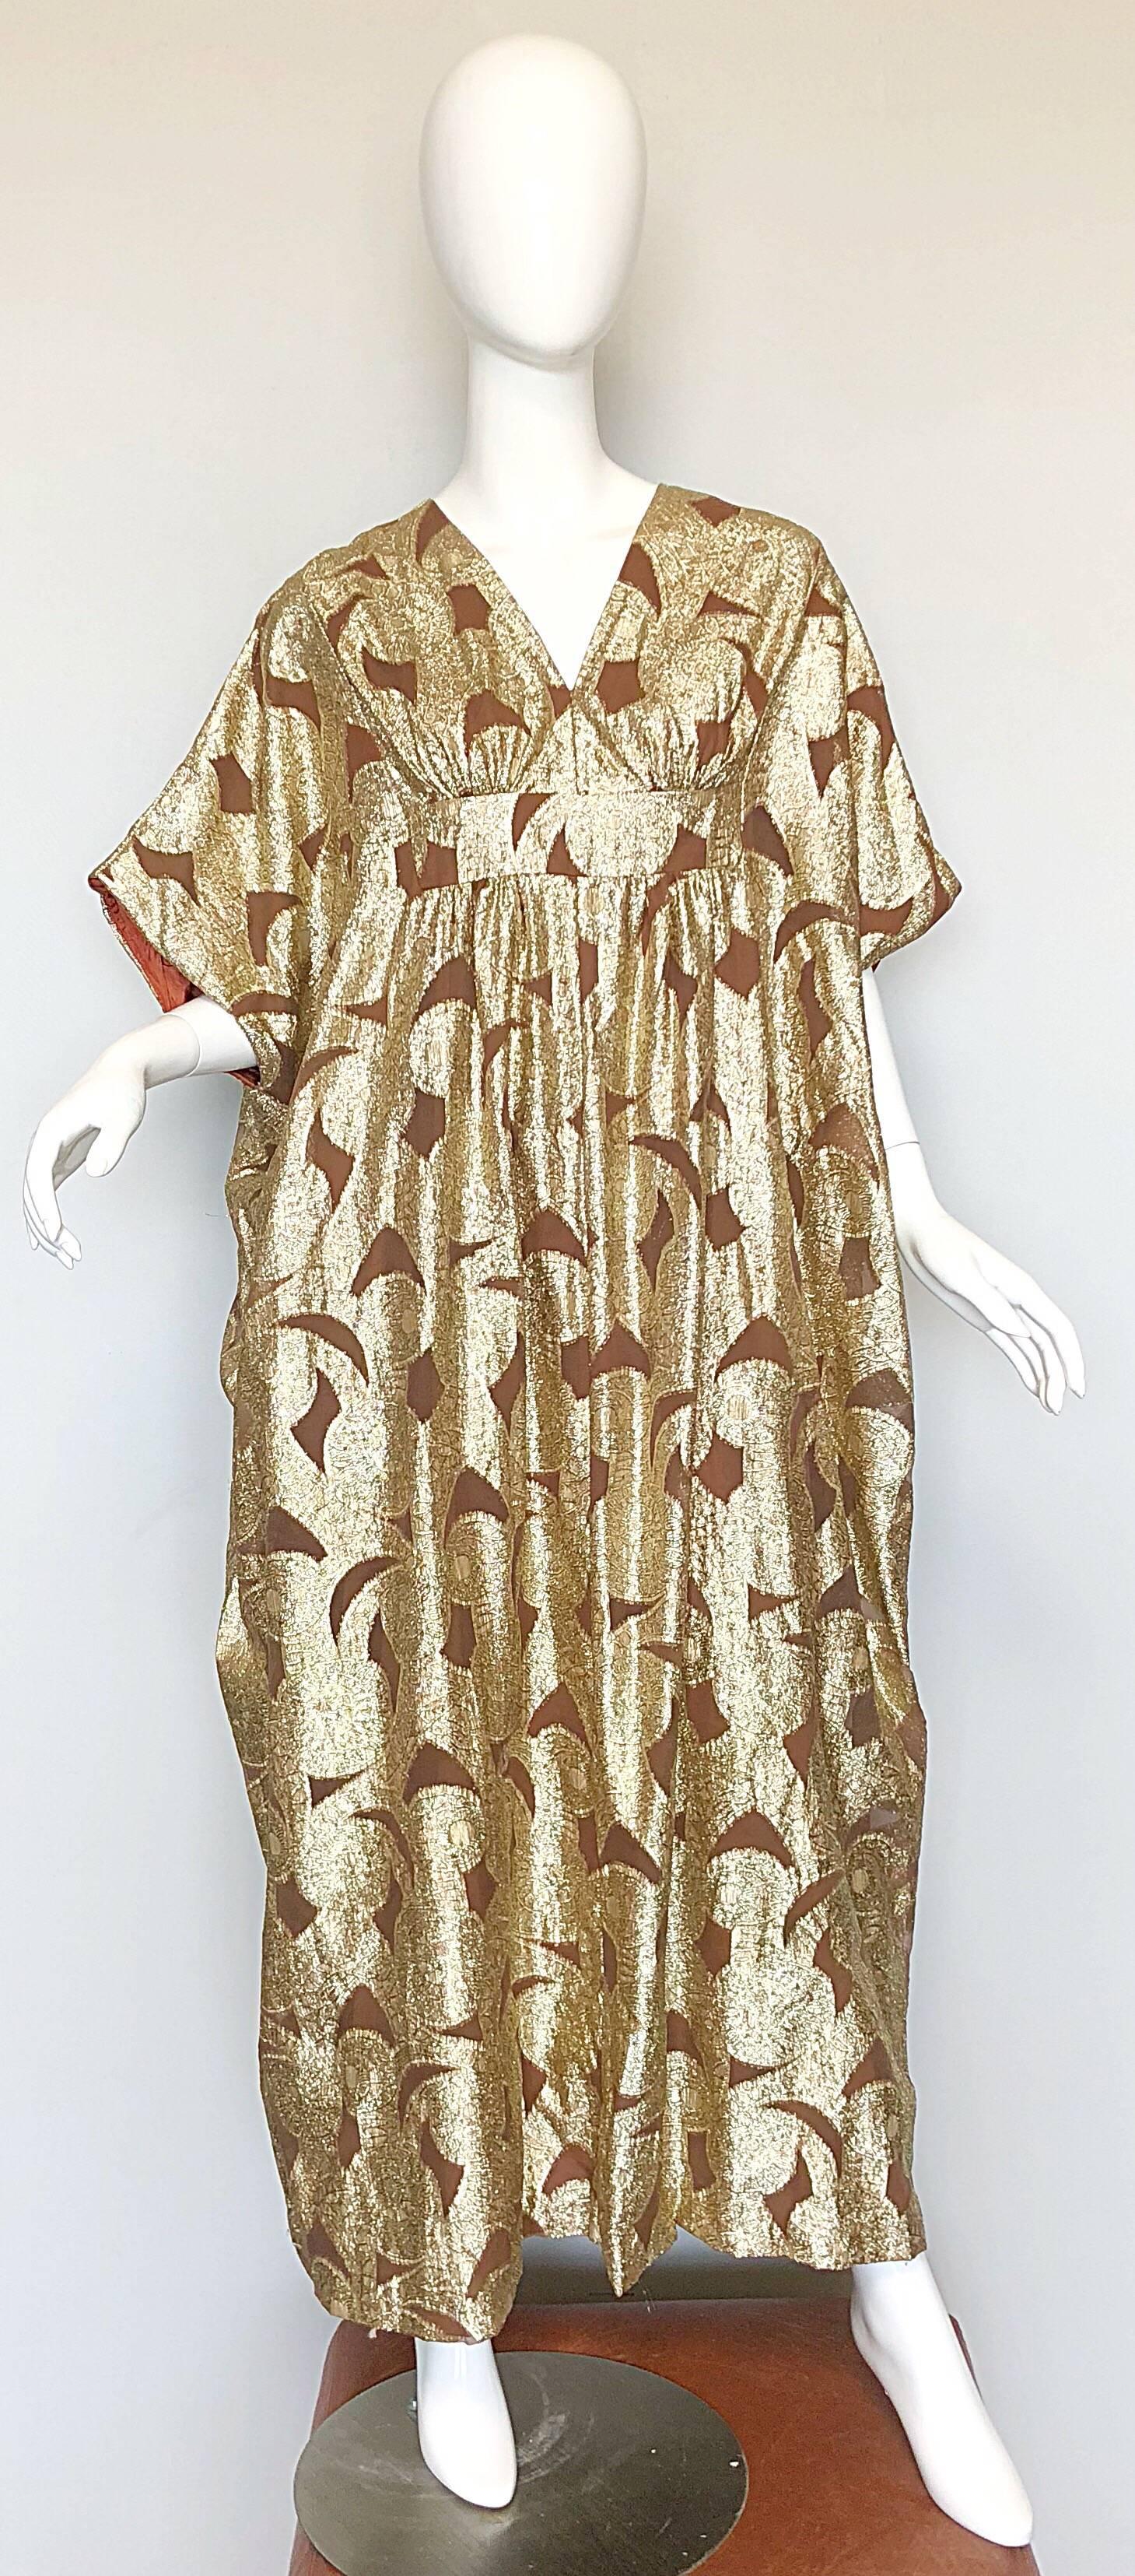 Amazing vintage 1960s gold metallic and taupe brown lurex and chiffon kaftan / maxi dress! Features gold metallic lurex with light brown chiffon abstract inlays. Simply slips over the head, with full metal zipper up the back with hook-and-eye